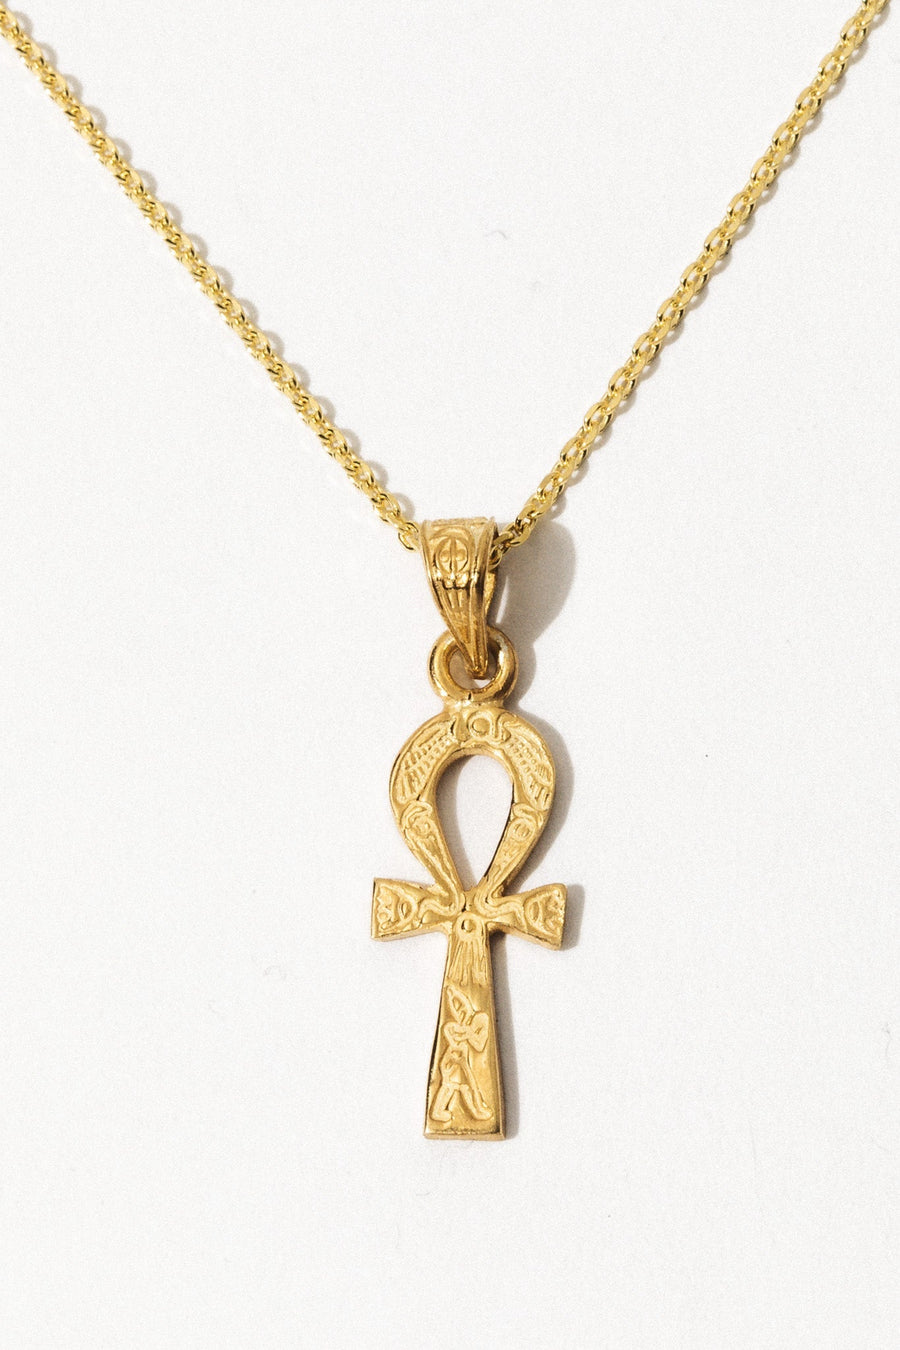 Amina Gad Jewelry Jewelry Gold / 17 Inches Great Ankh of Ra Necklace